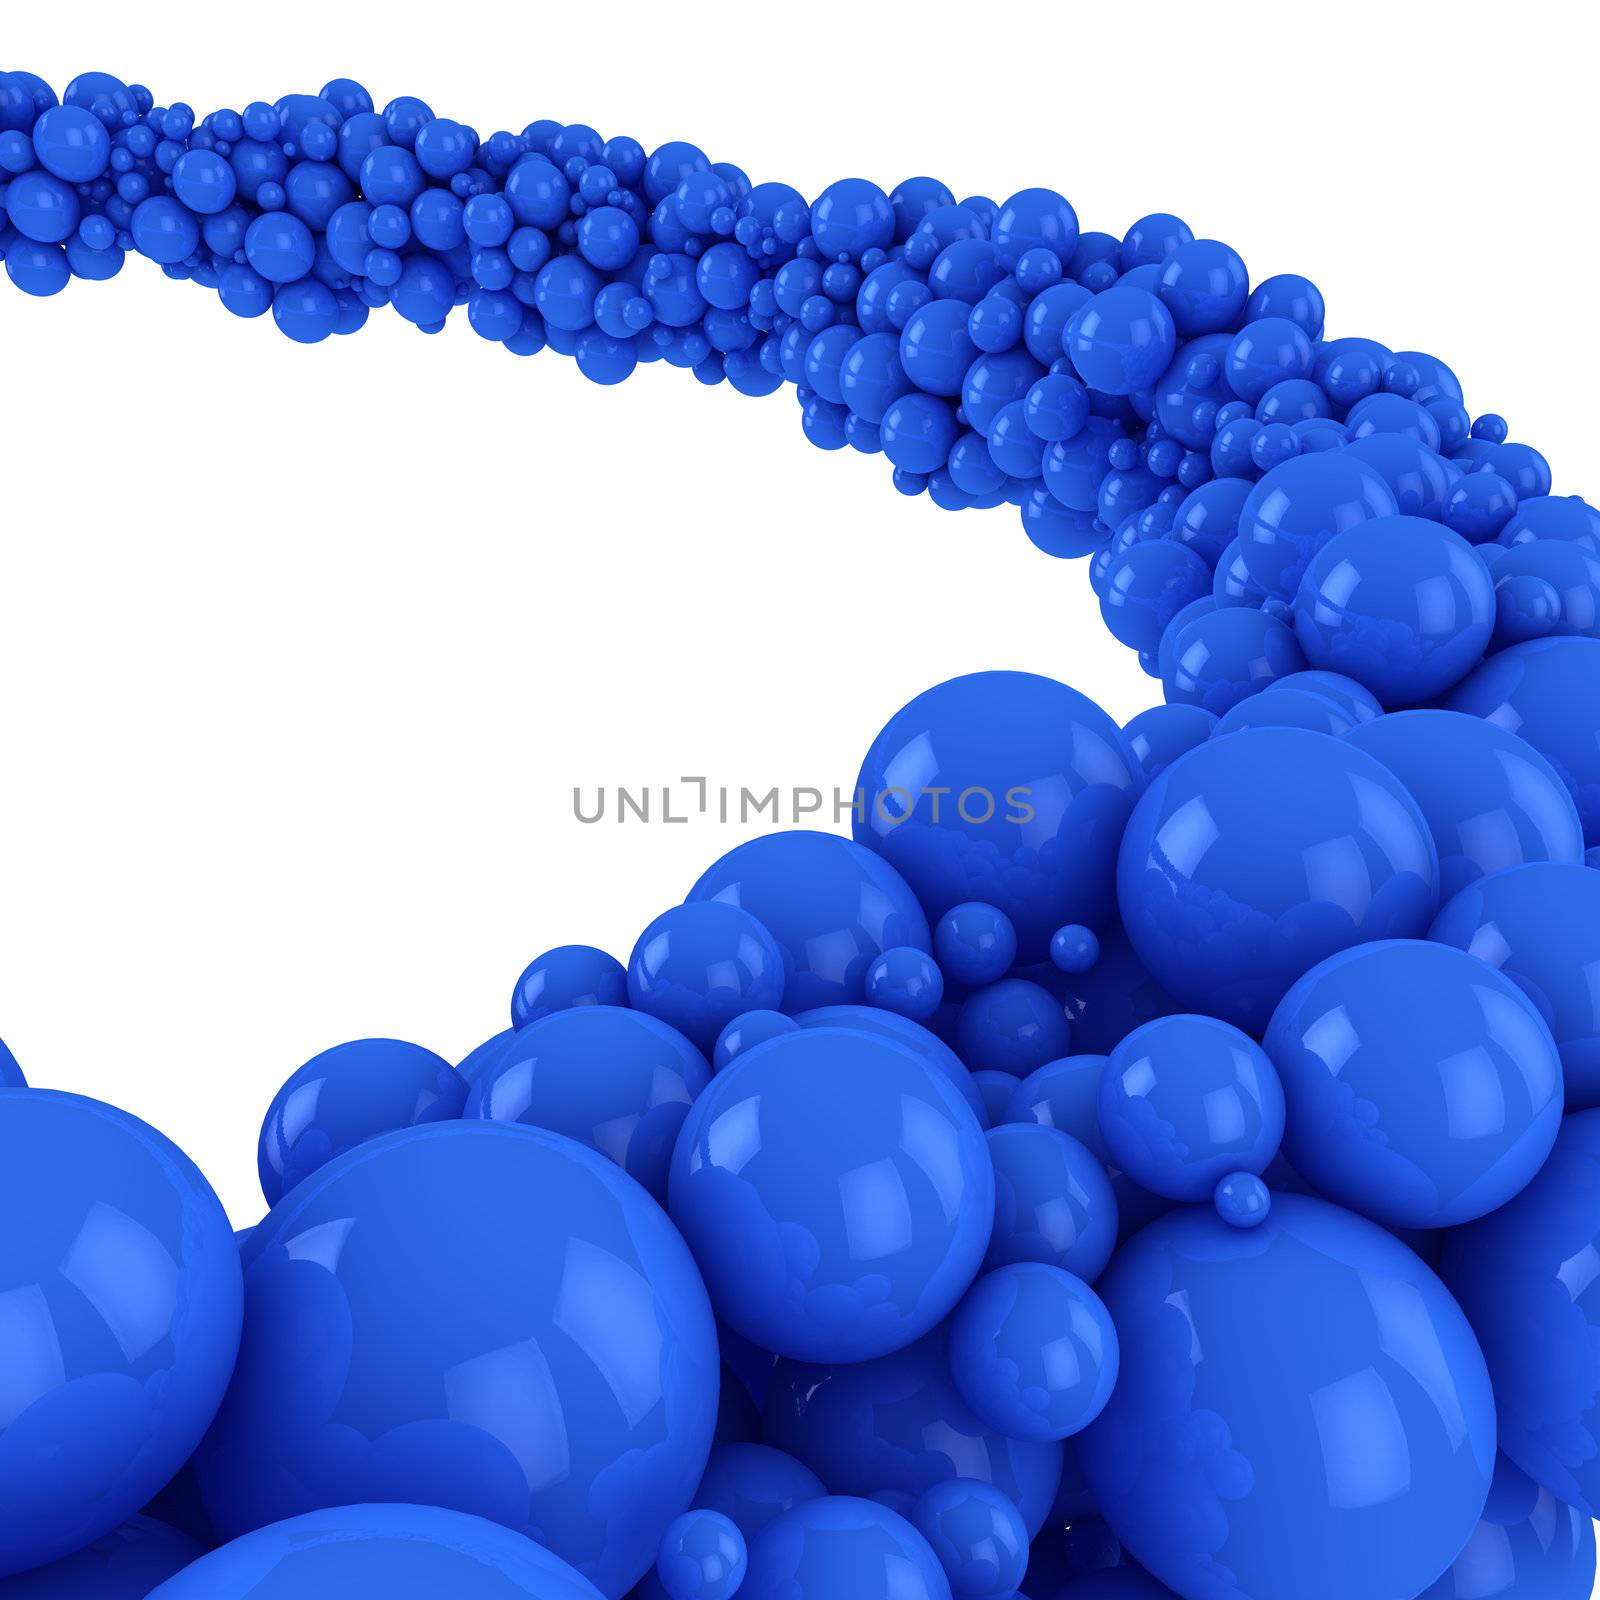 Flow of many blue spheres on the white background